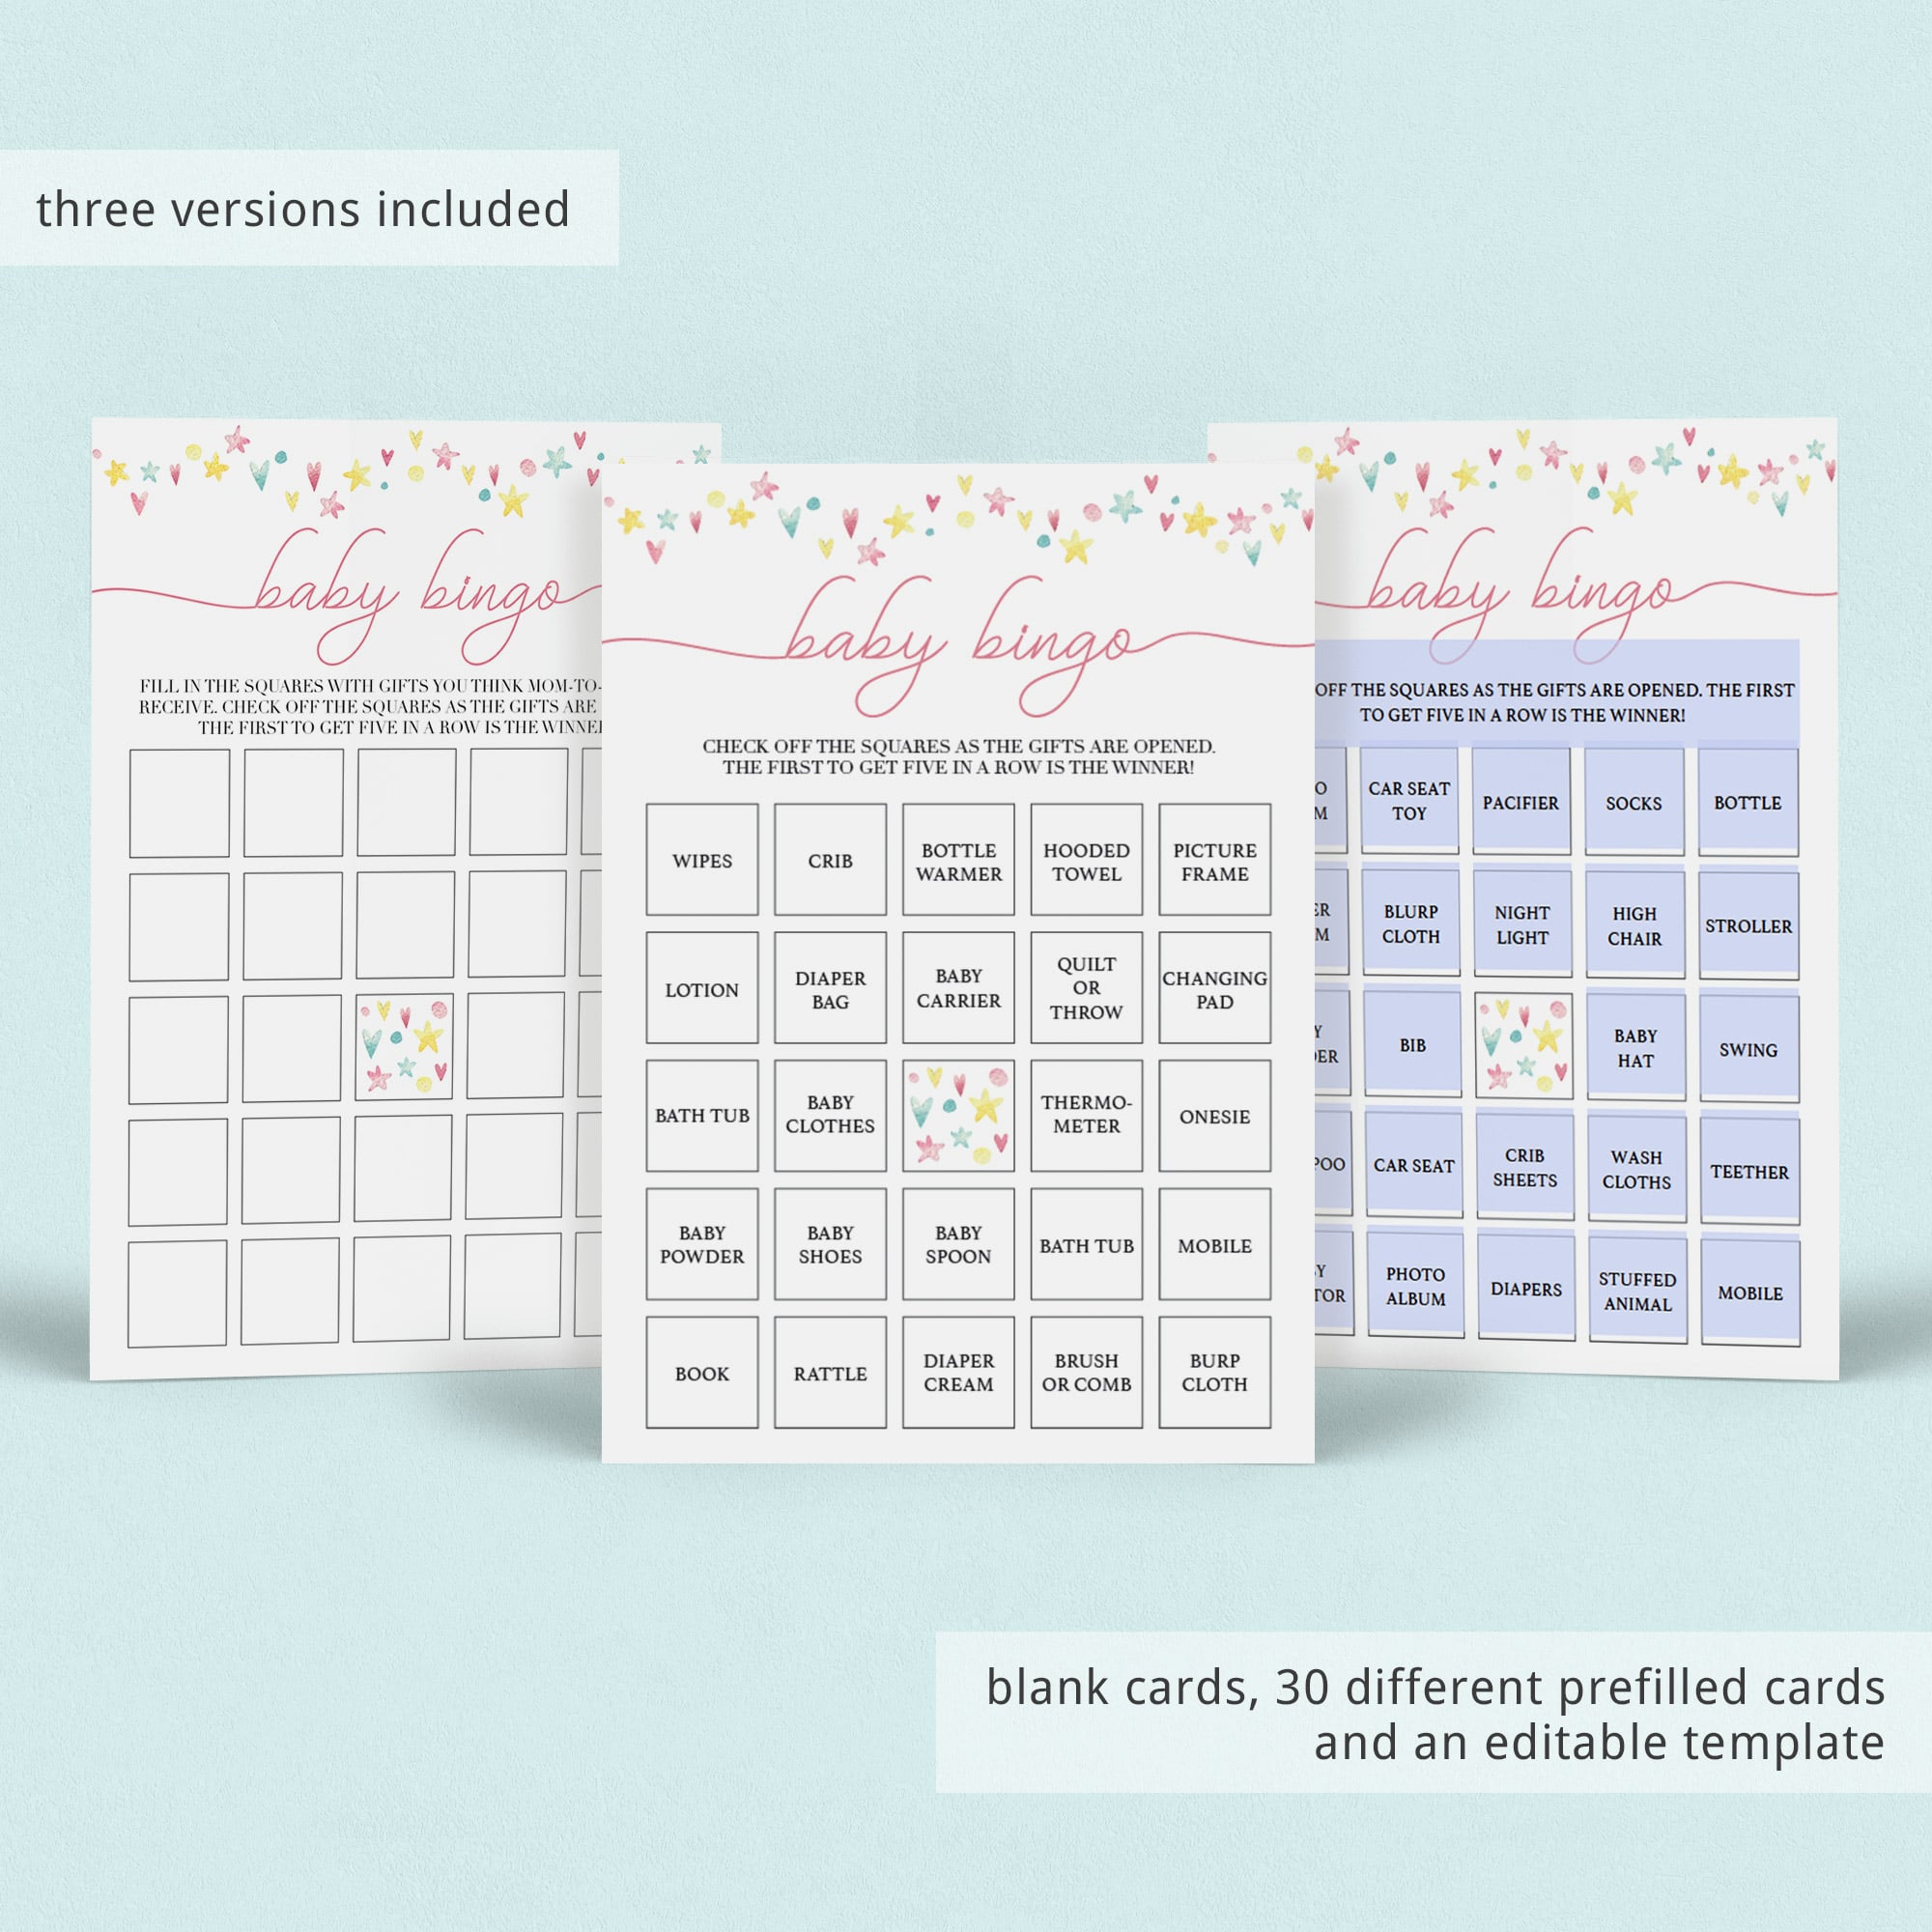 Printable baby bingo set with blank and prefilled cards by LittleSizzle